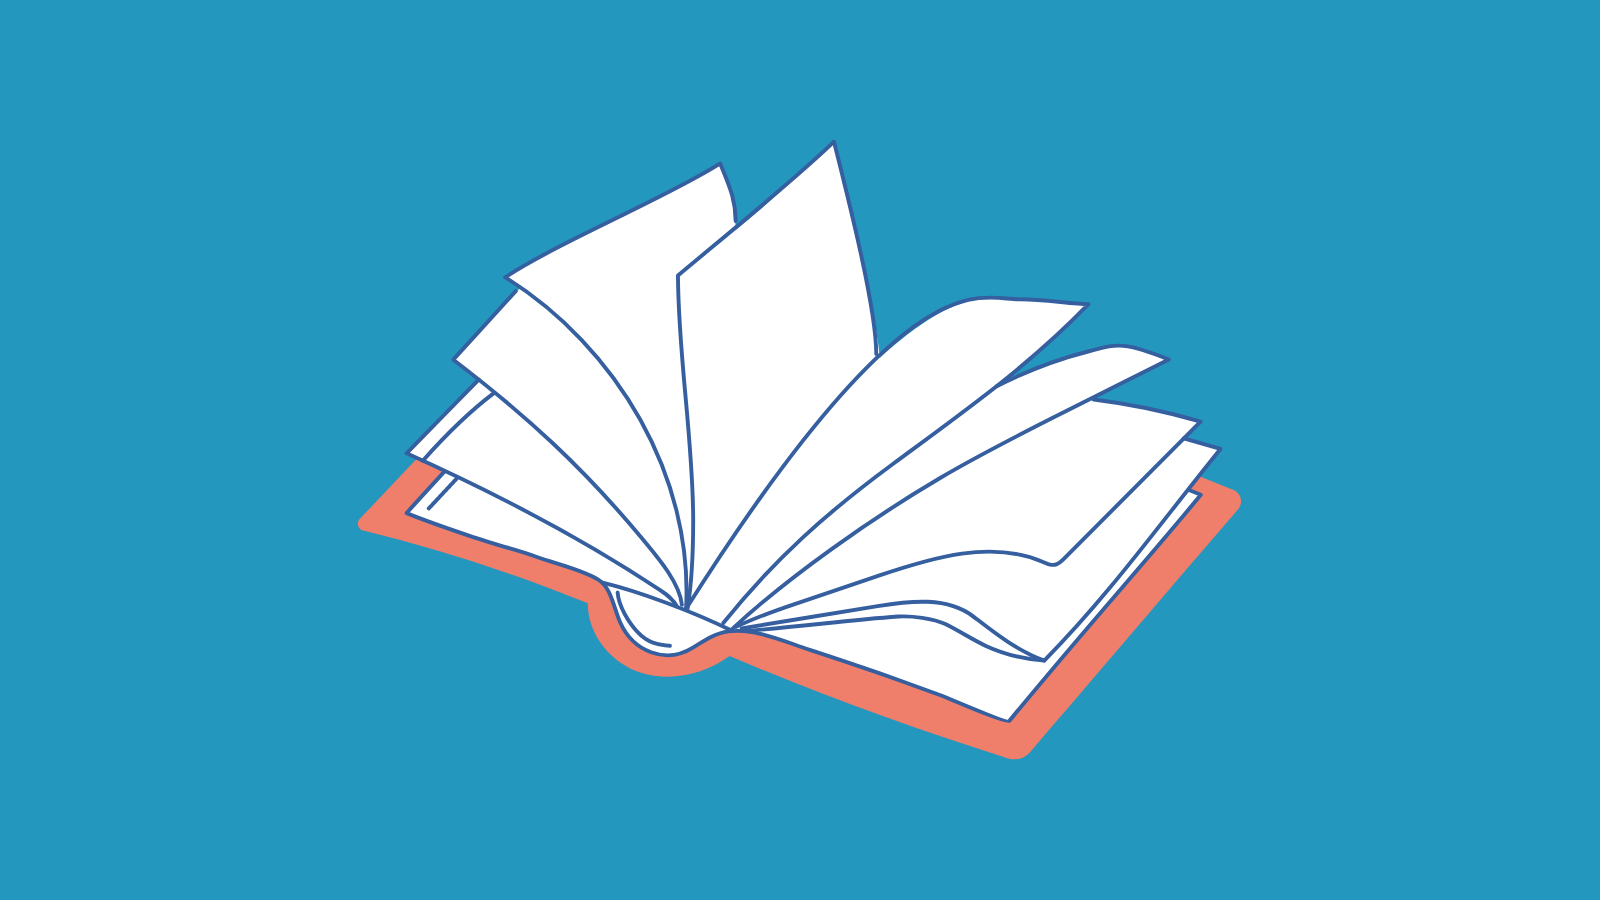 A graphic of an open book